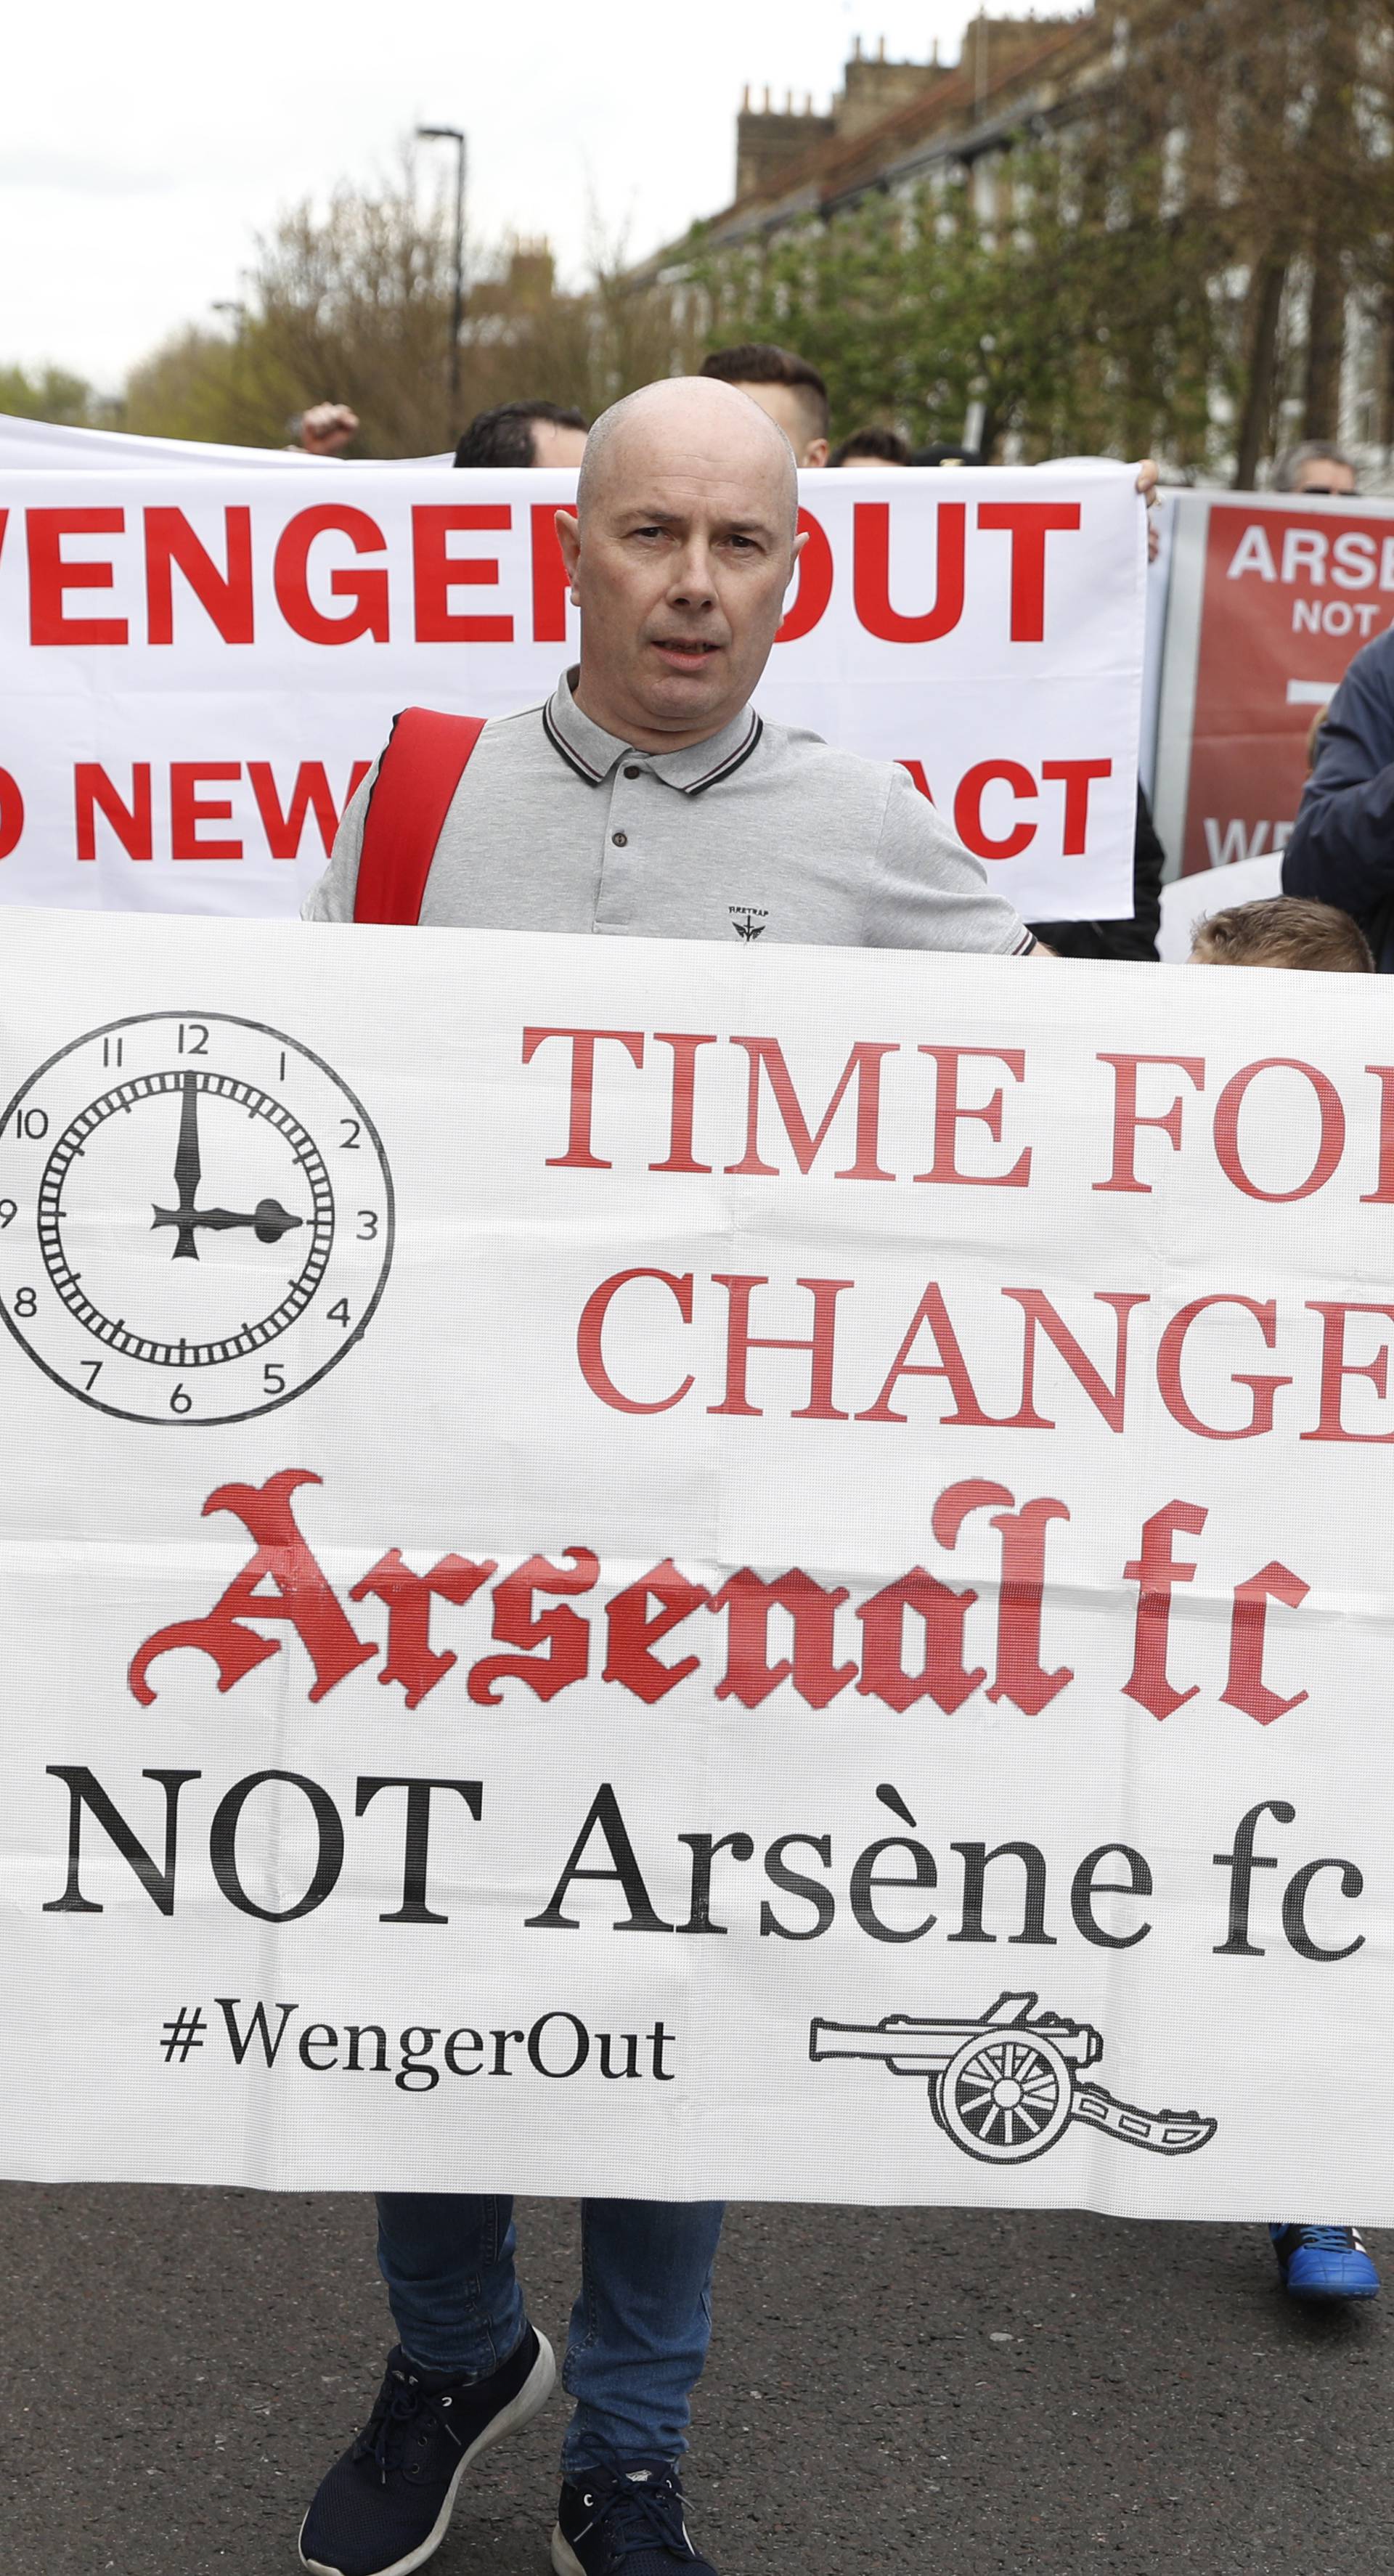 Arsenal fans protest against manager Arsene Wenger outside the stadium before the game